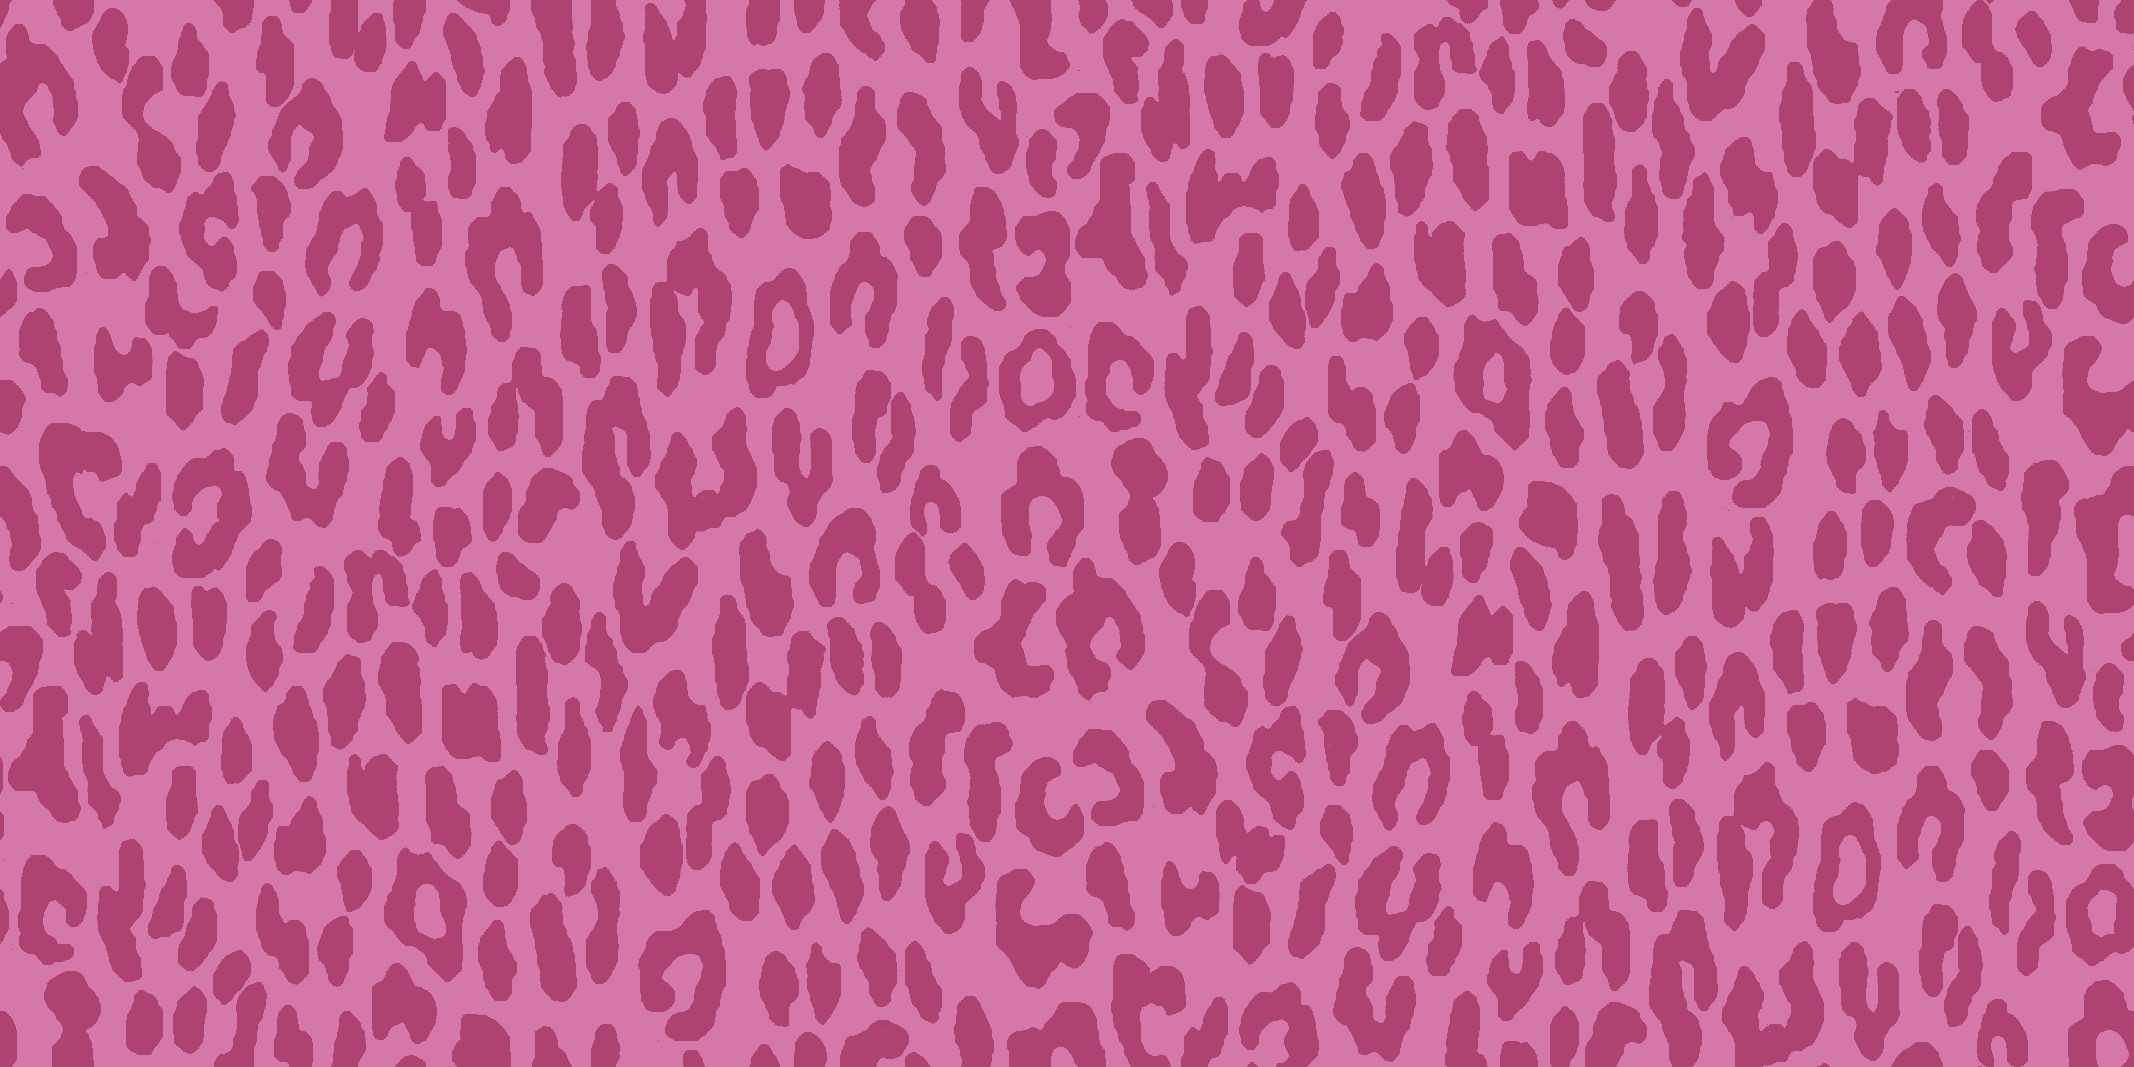 Waverly Inspirations 44" 100% Cotton Wild Spots Sewing & Craft Fabric By the Yard, Magenta